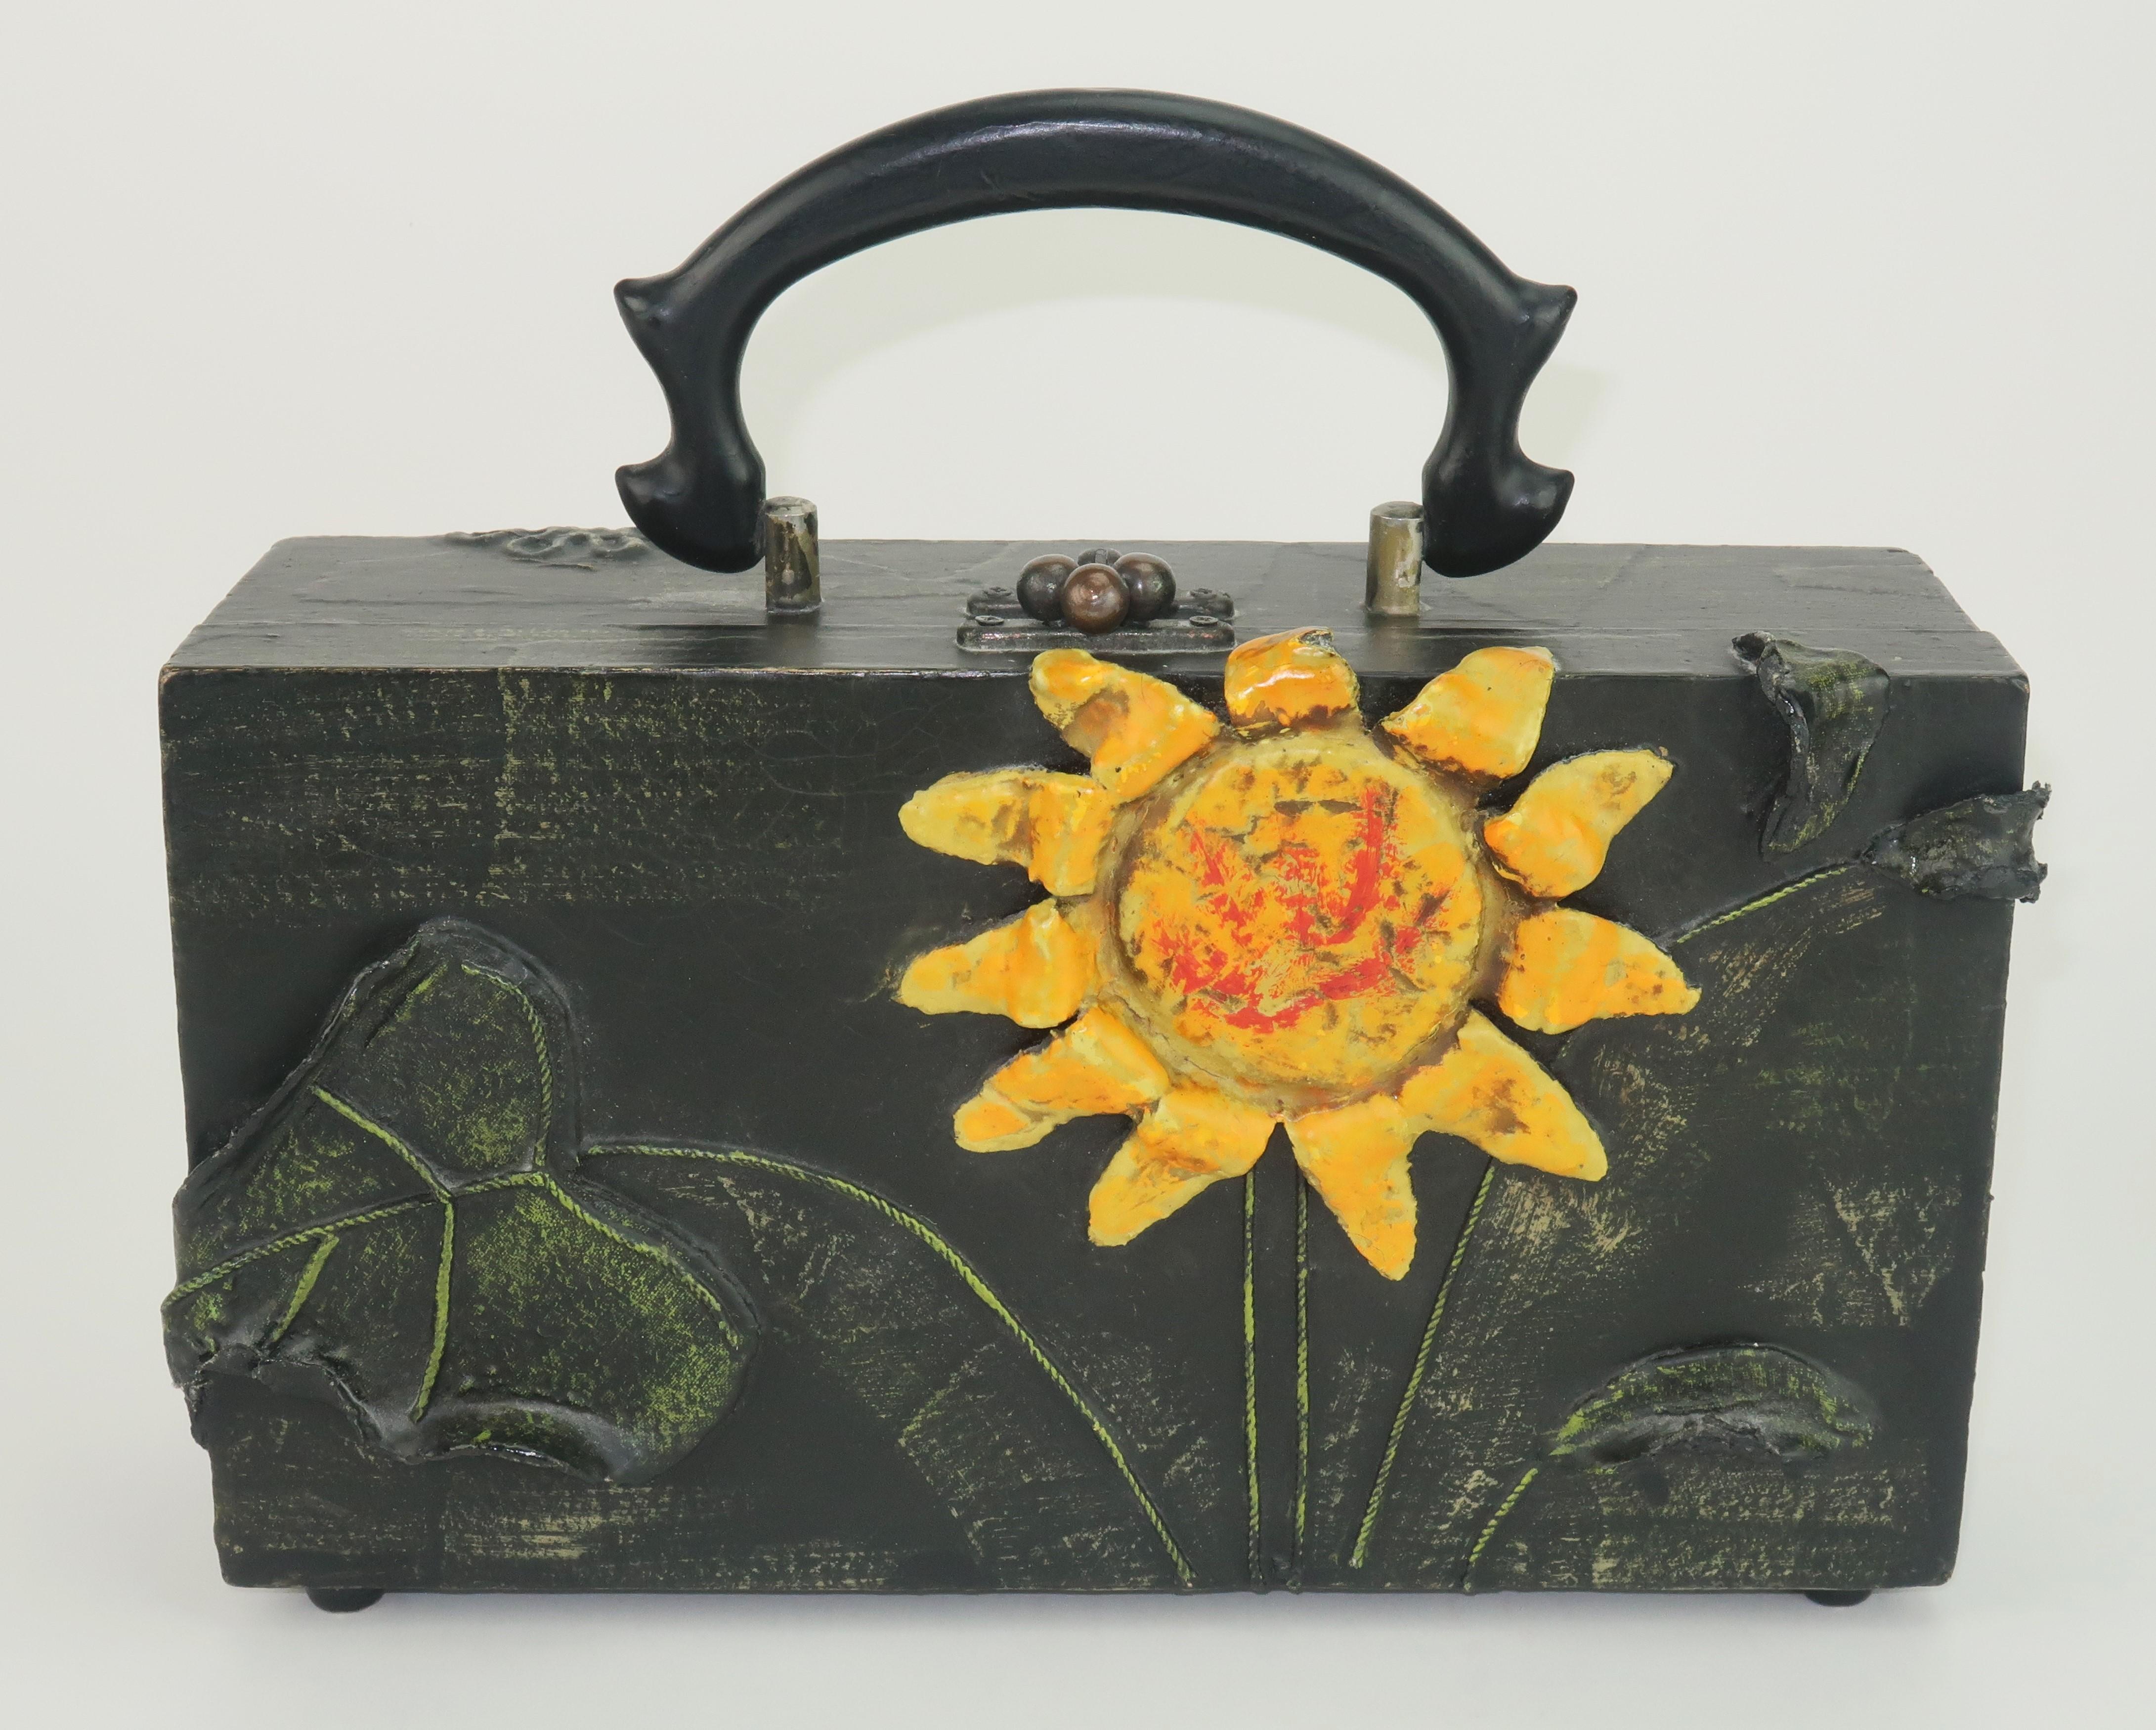 1970 Lady London novelty wood box handbag in a deep dark green (almost black) with fabric and papier mache decoration depicting a yellow sunflower highlighted with a touch of red.  It opens with a door knocker style closure and reveals an orange